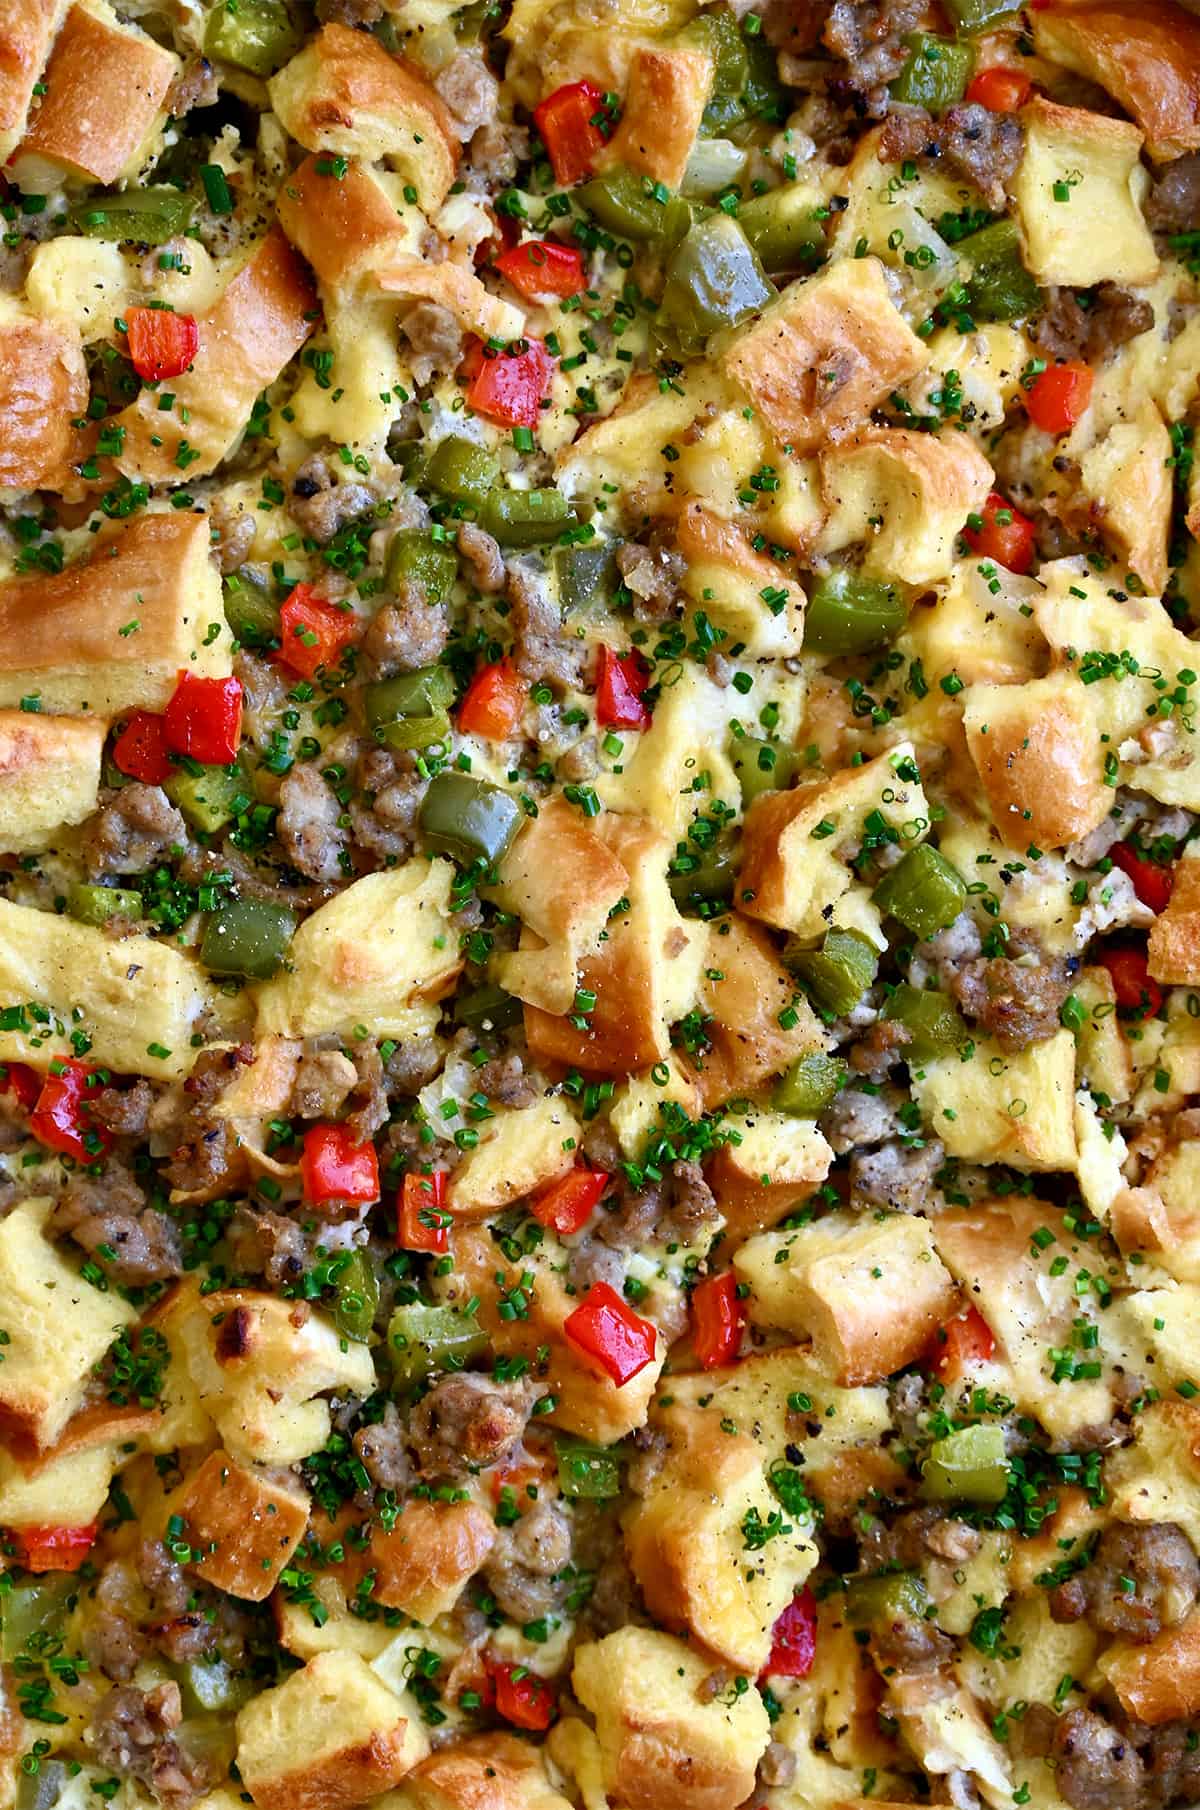 A closeup view of egg breakfast casserole with cubed French bread, sausage and diced veggies.